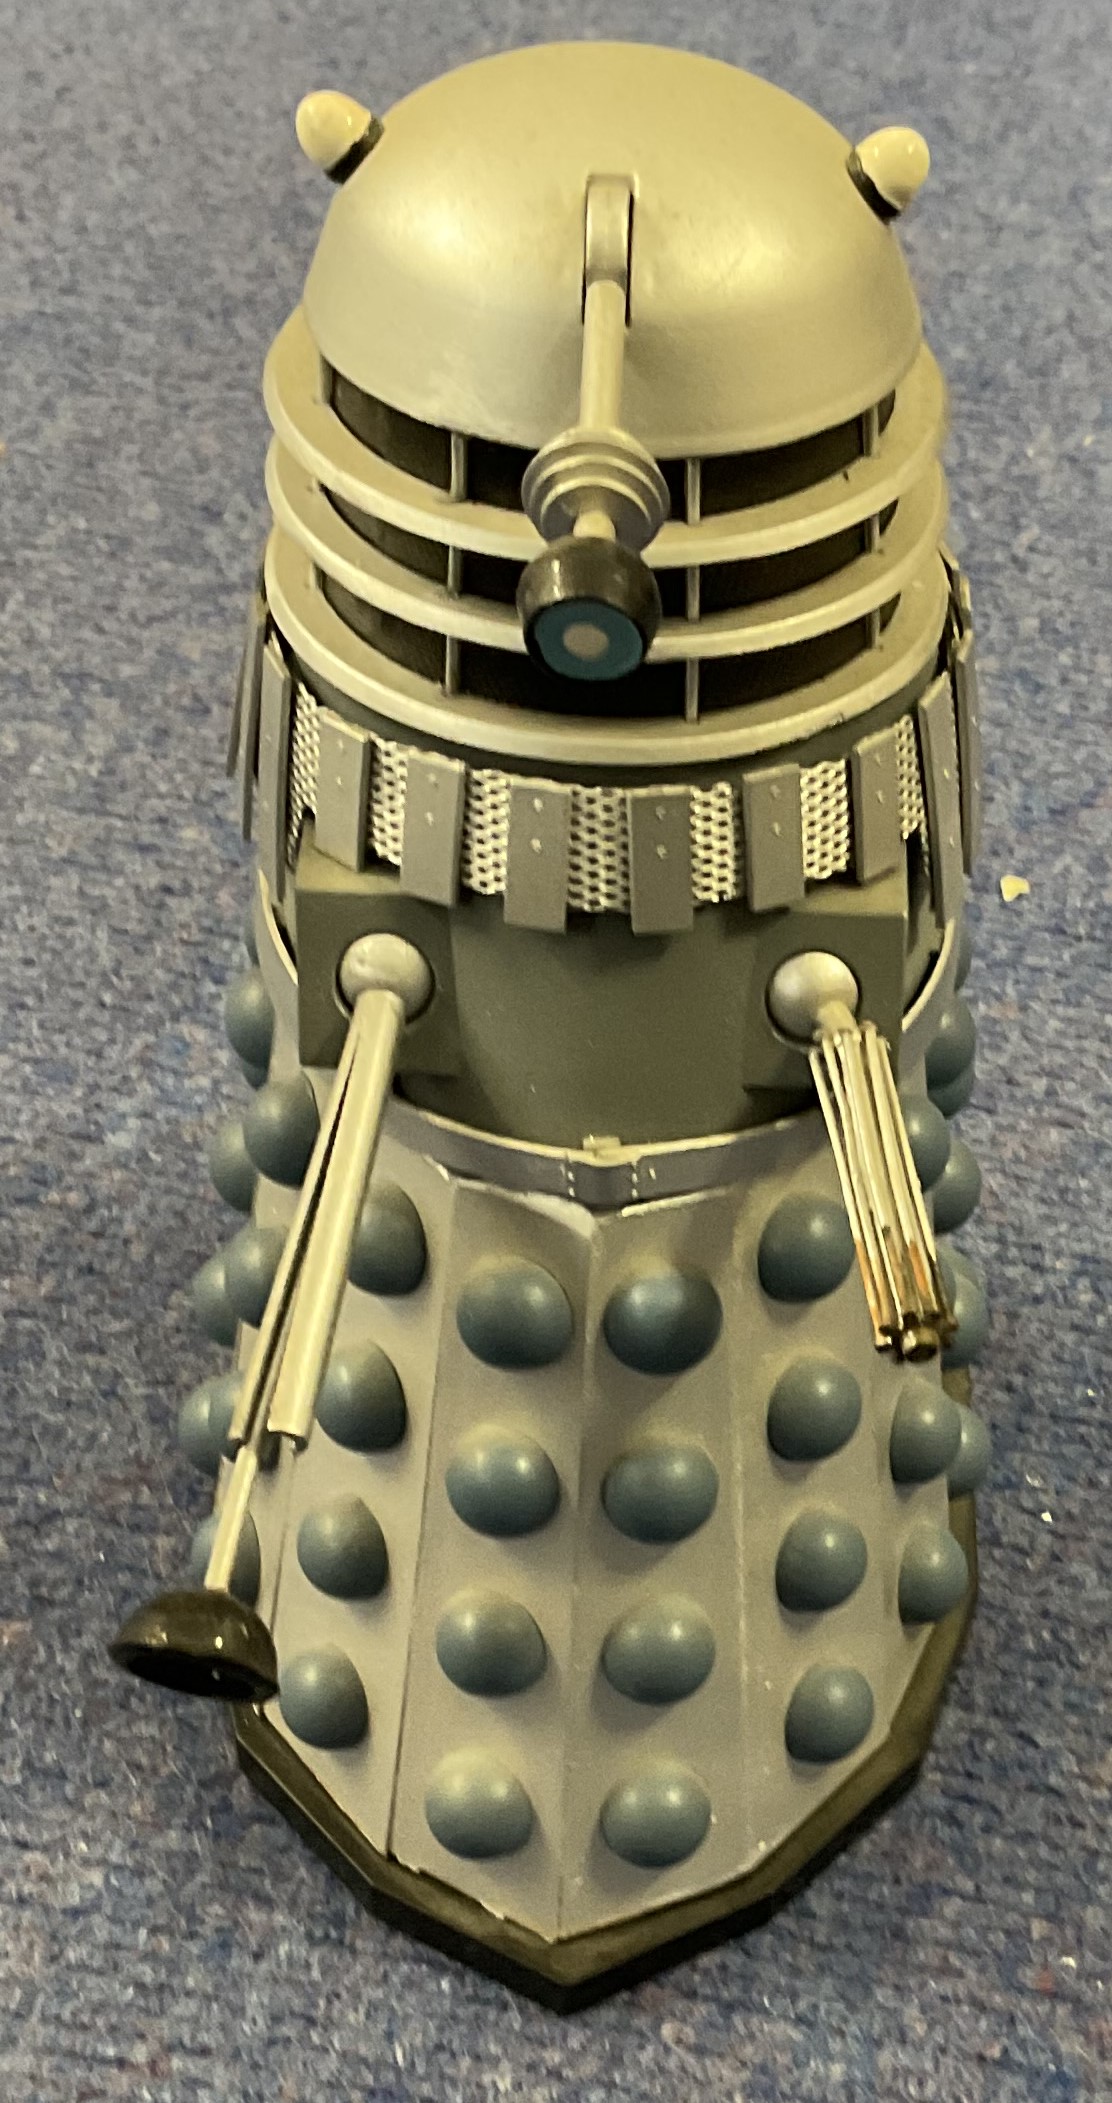 Dalek Model by Amerang approx 8 inches tall Silver in colour and made of Plastic good conditionWe